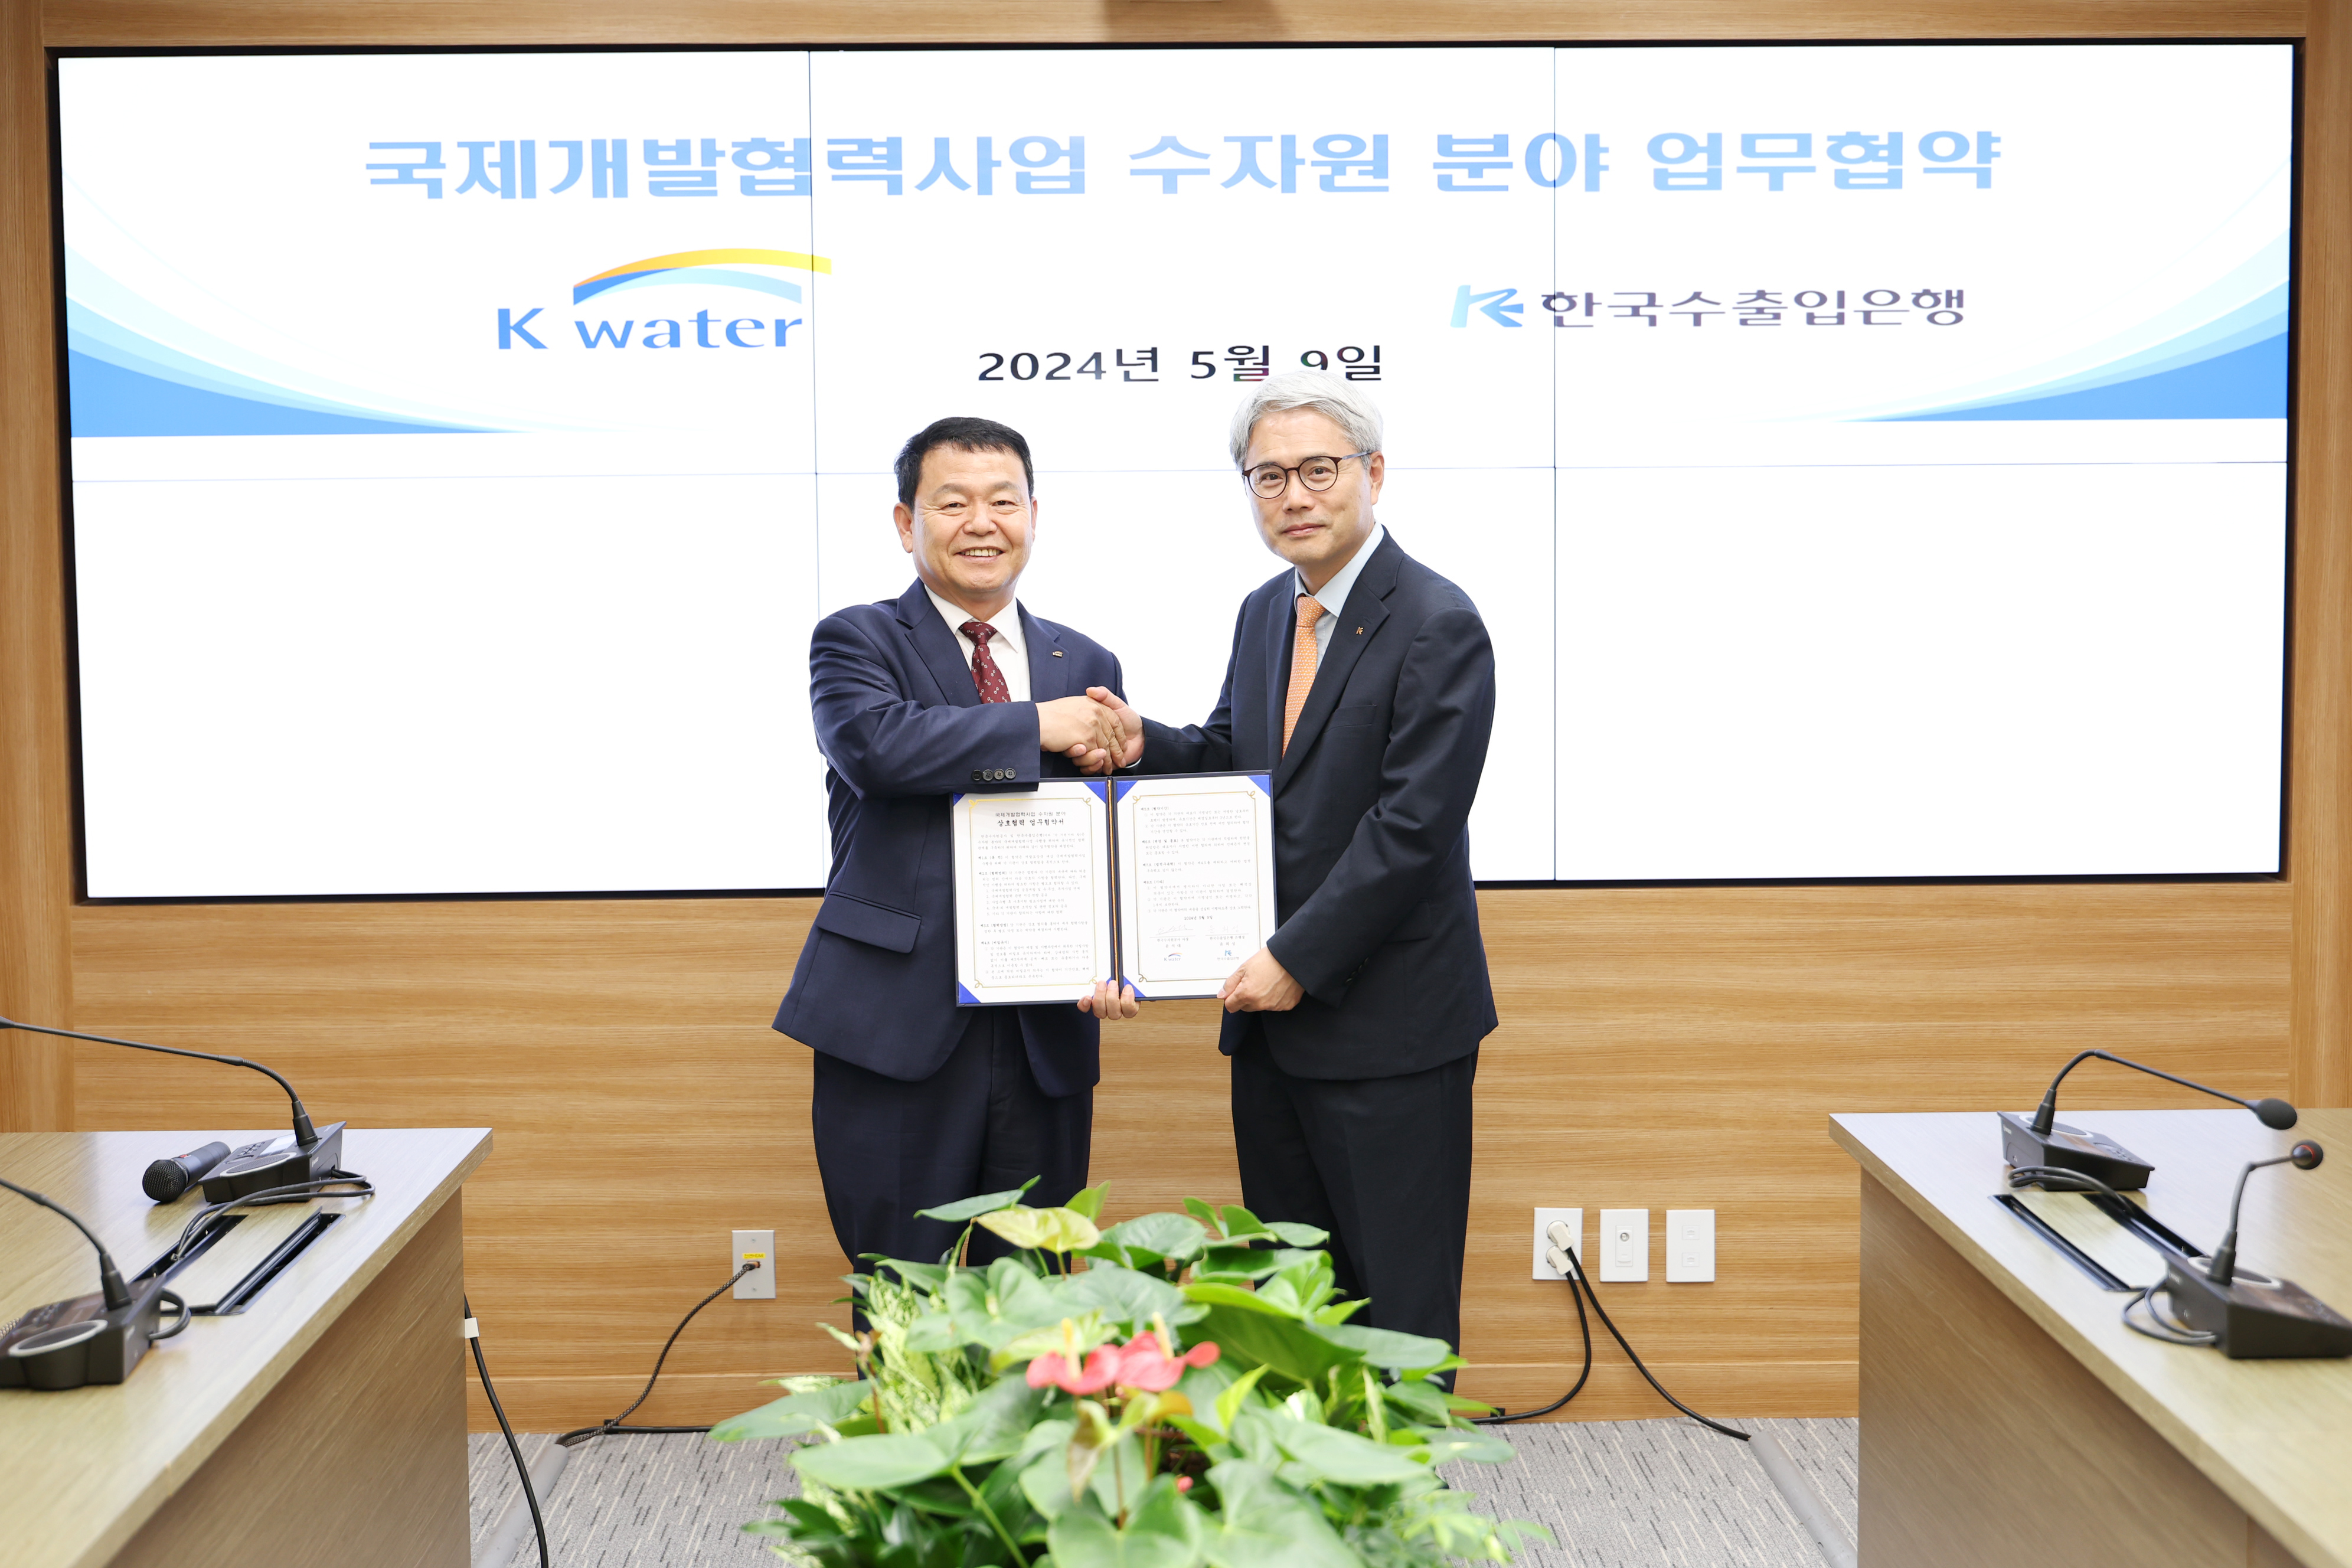 MOU with Korea Export-Import Bank